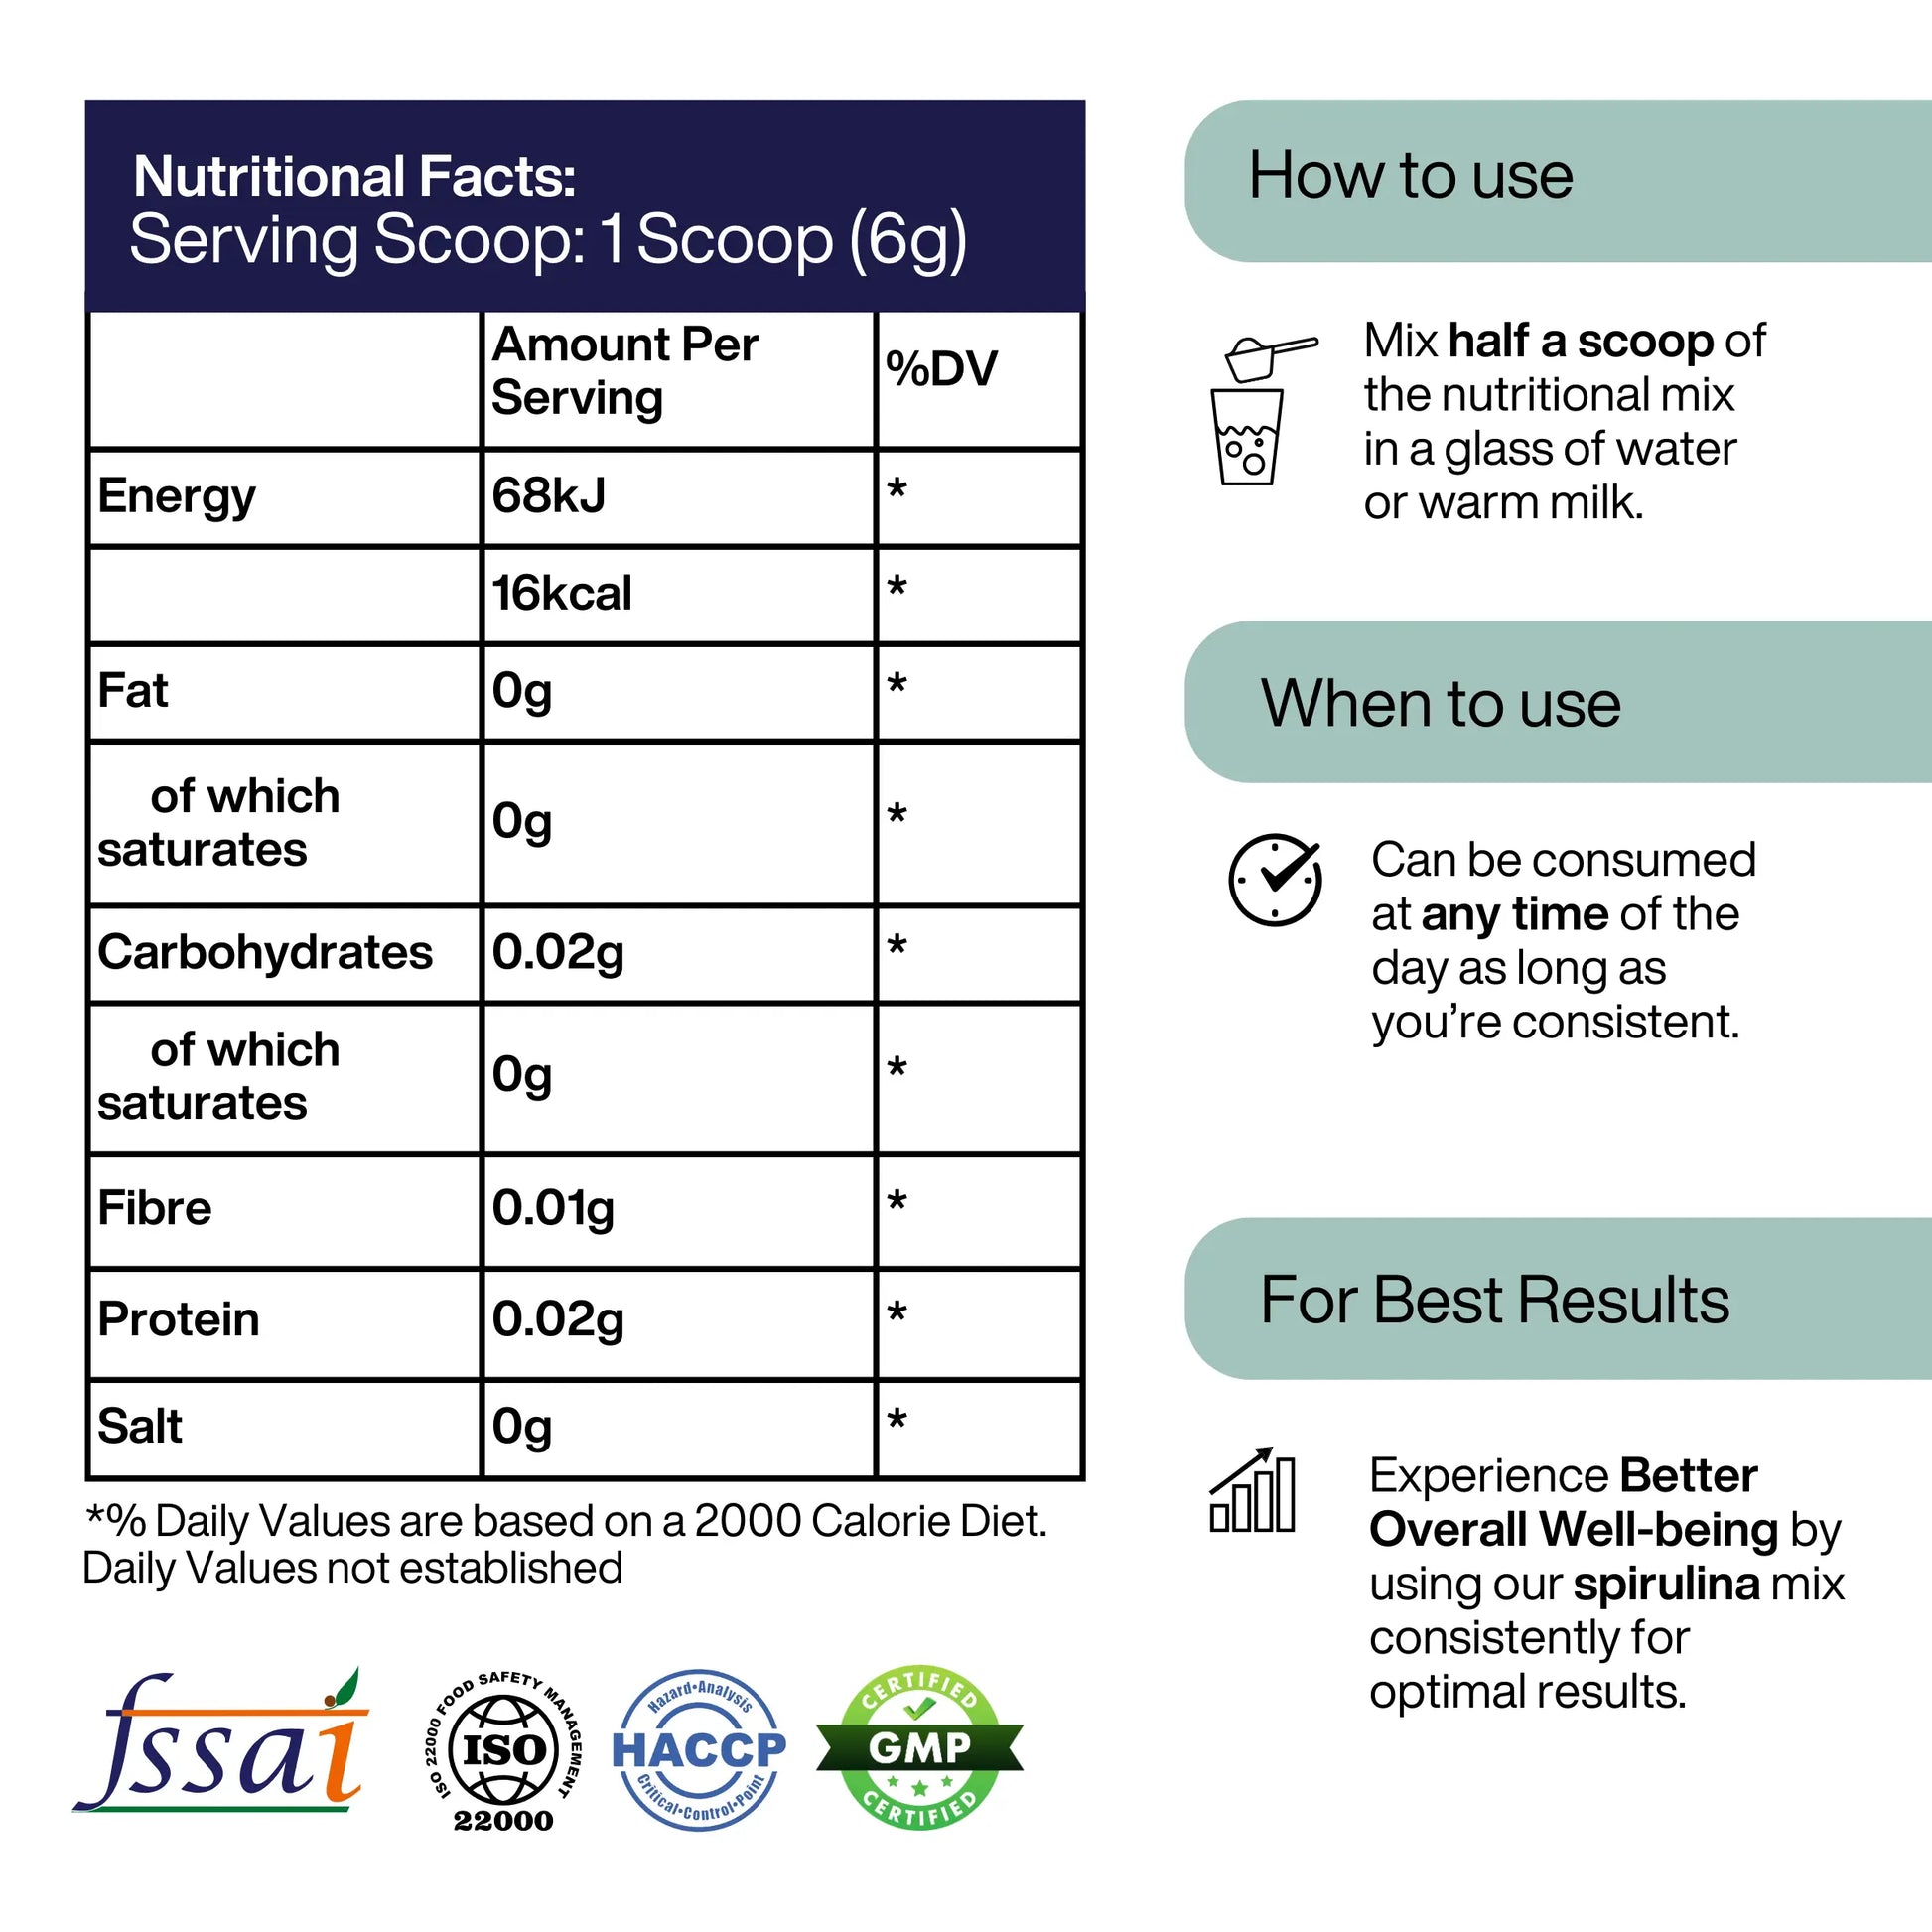 Picture of Puretive's Pure Spirulina Nutrition Mix's Nutritional Facts, How to use, When to use & How to get the Best Resuts. Also Certifications like FSSAI, ISO, HACCP & GMP are mentioned.